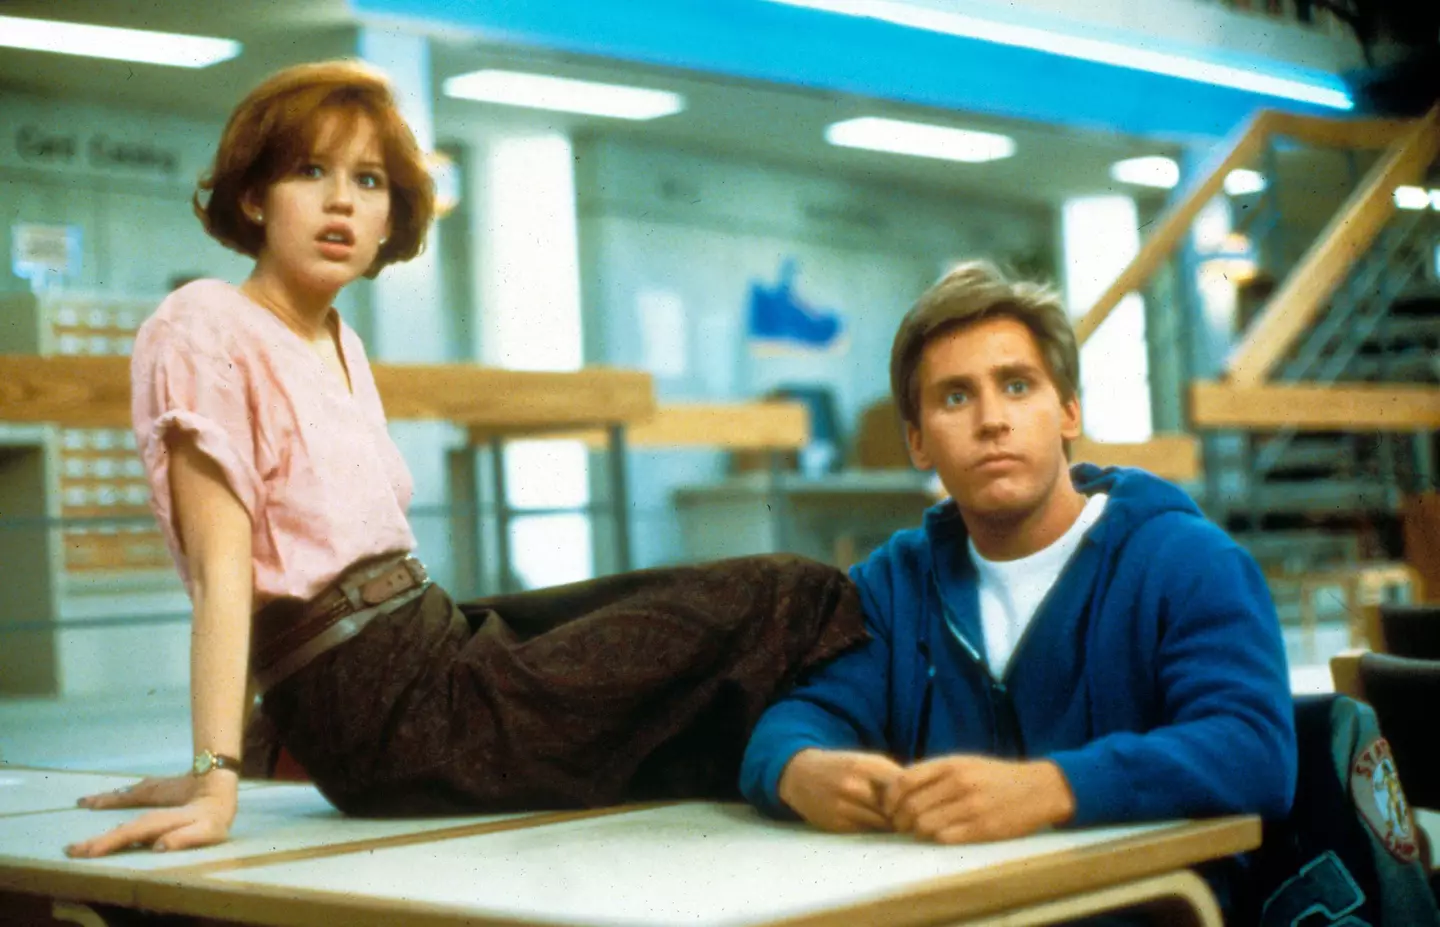 Molly Ringwald played Claire Standish in The Breakfast Club.